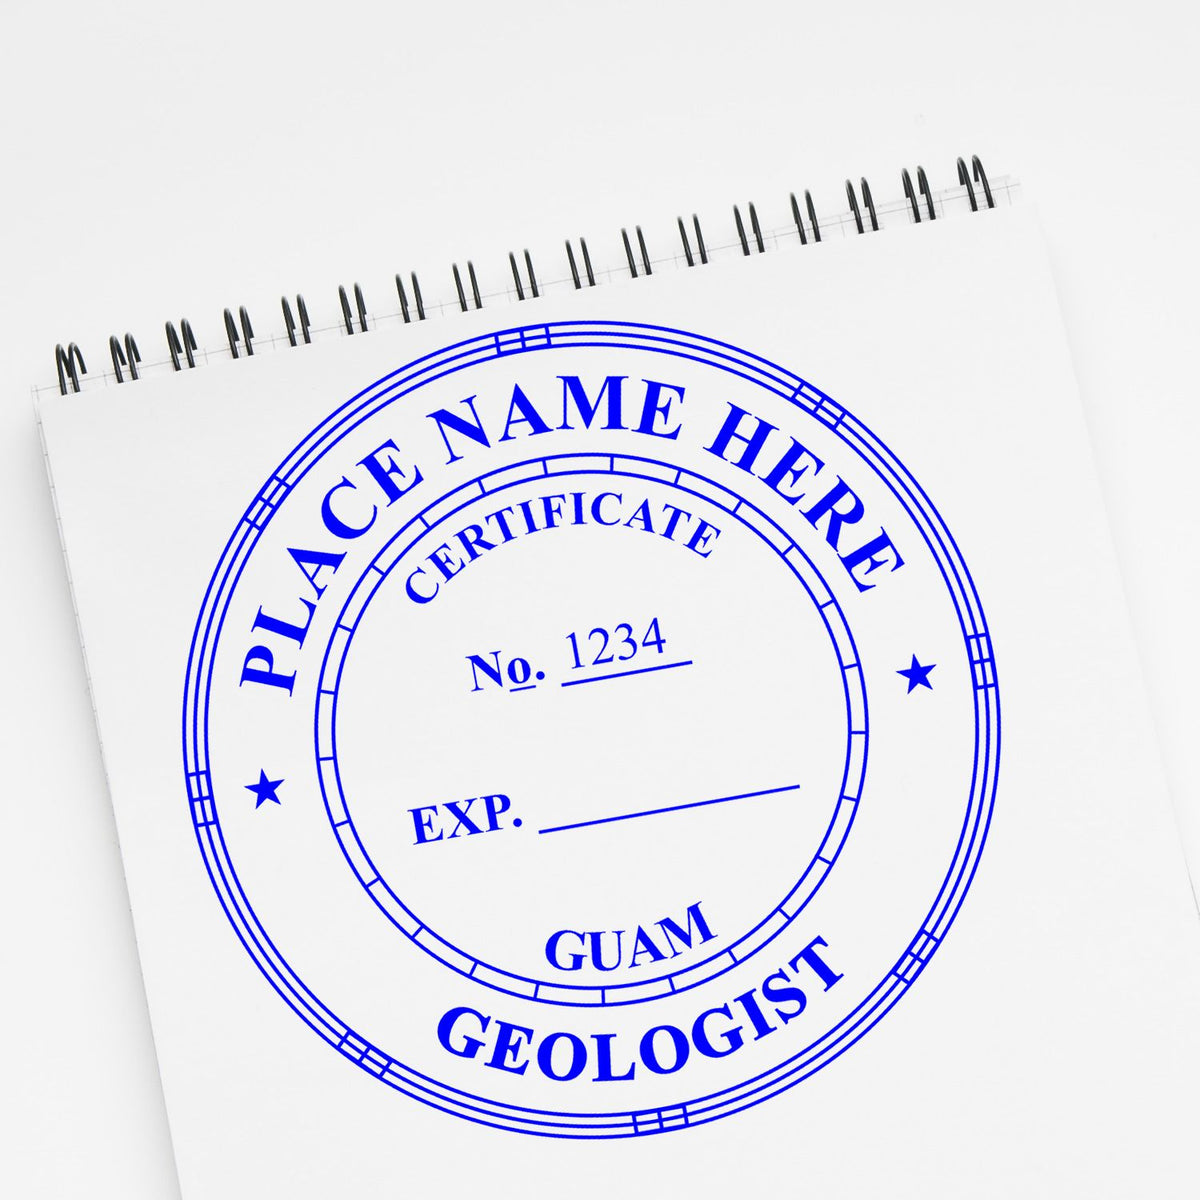 Another Example of a stamped impression of the Premium MaxLight Pre-Inked Guam Geology Stamp on a office form